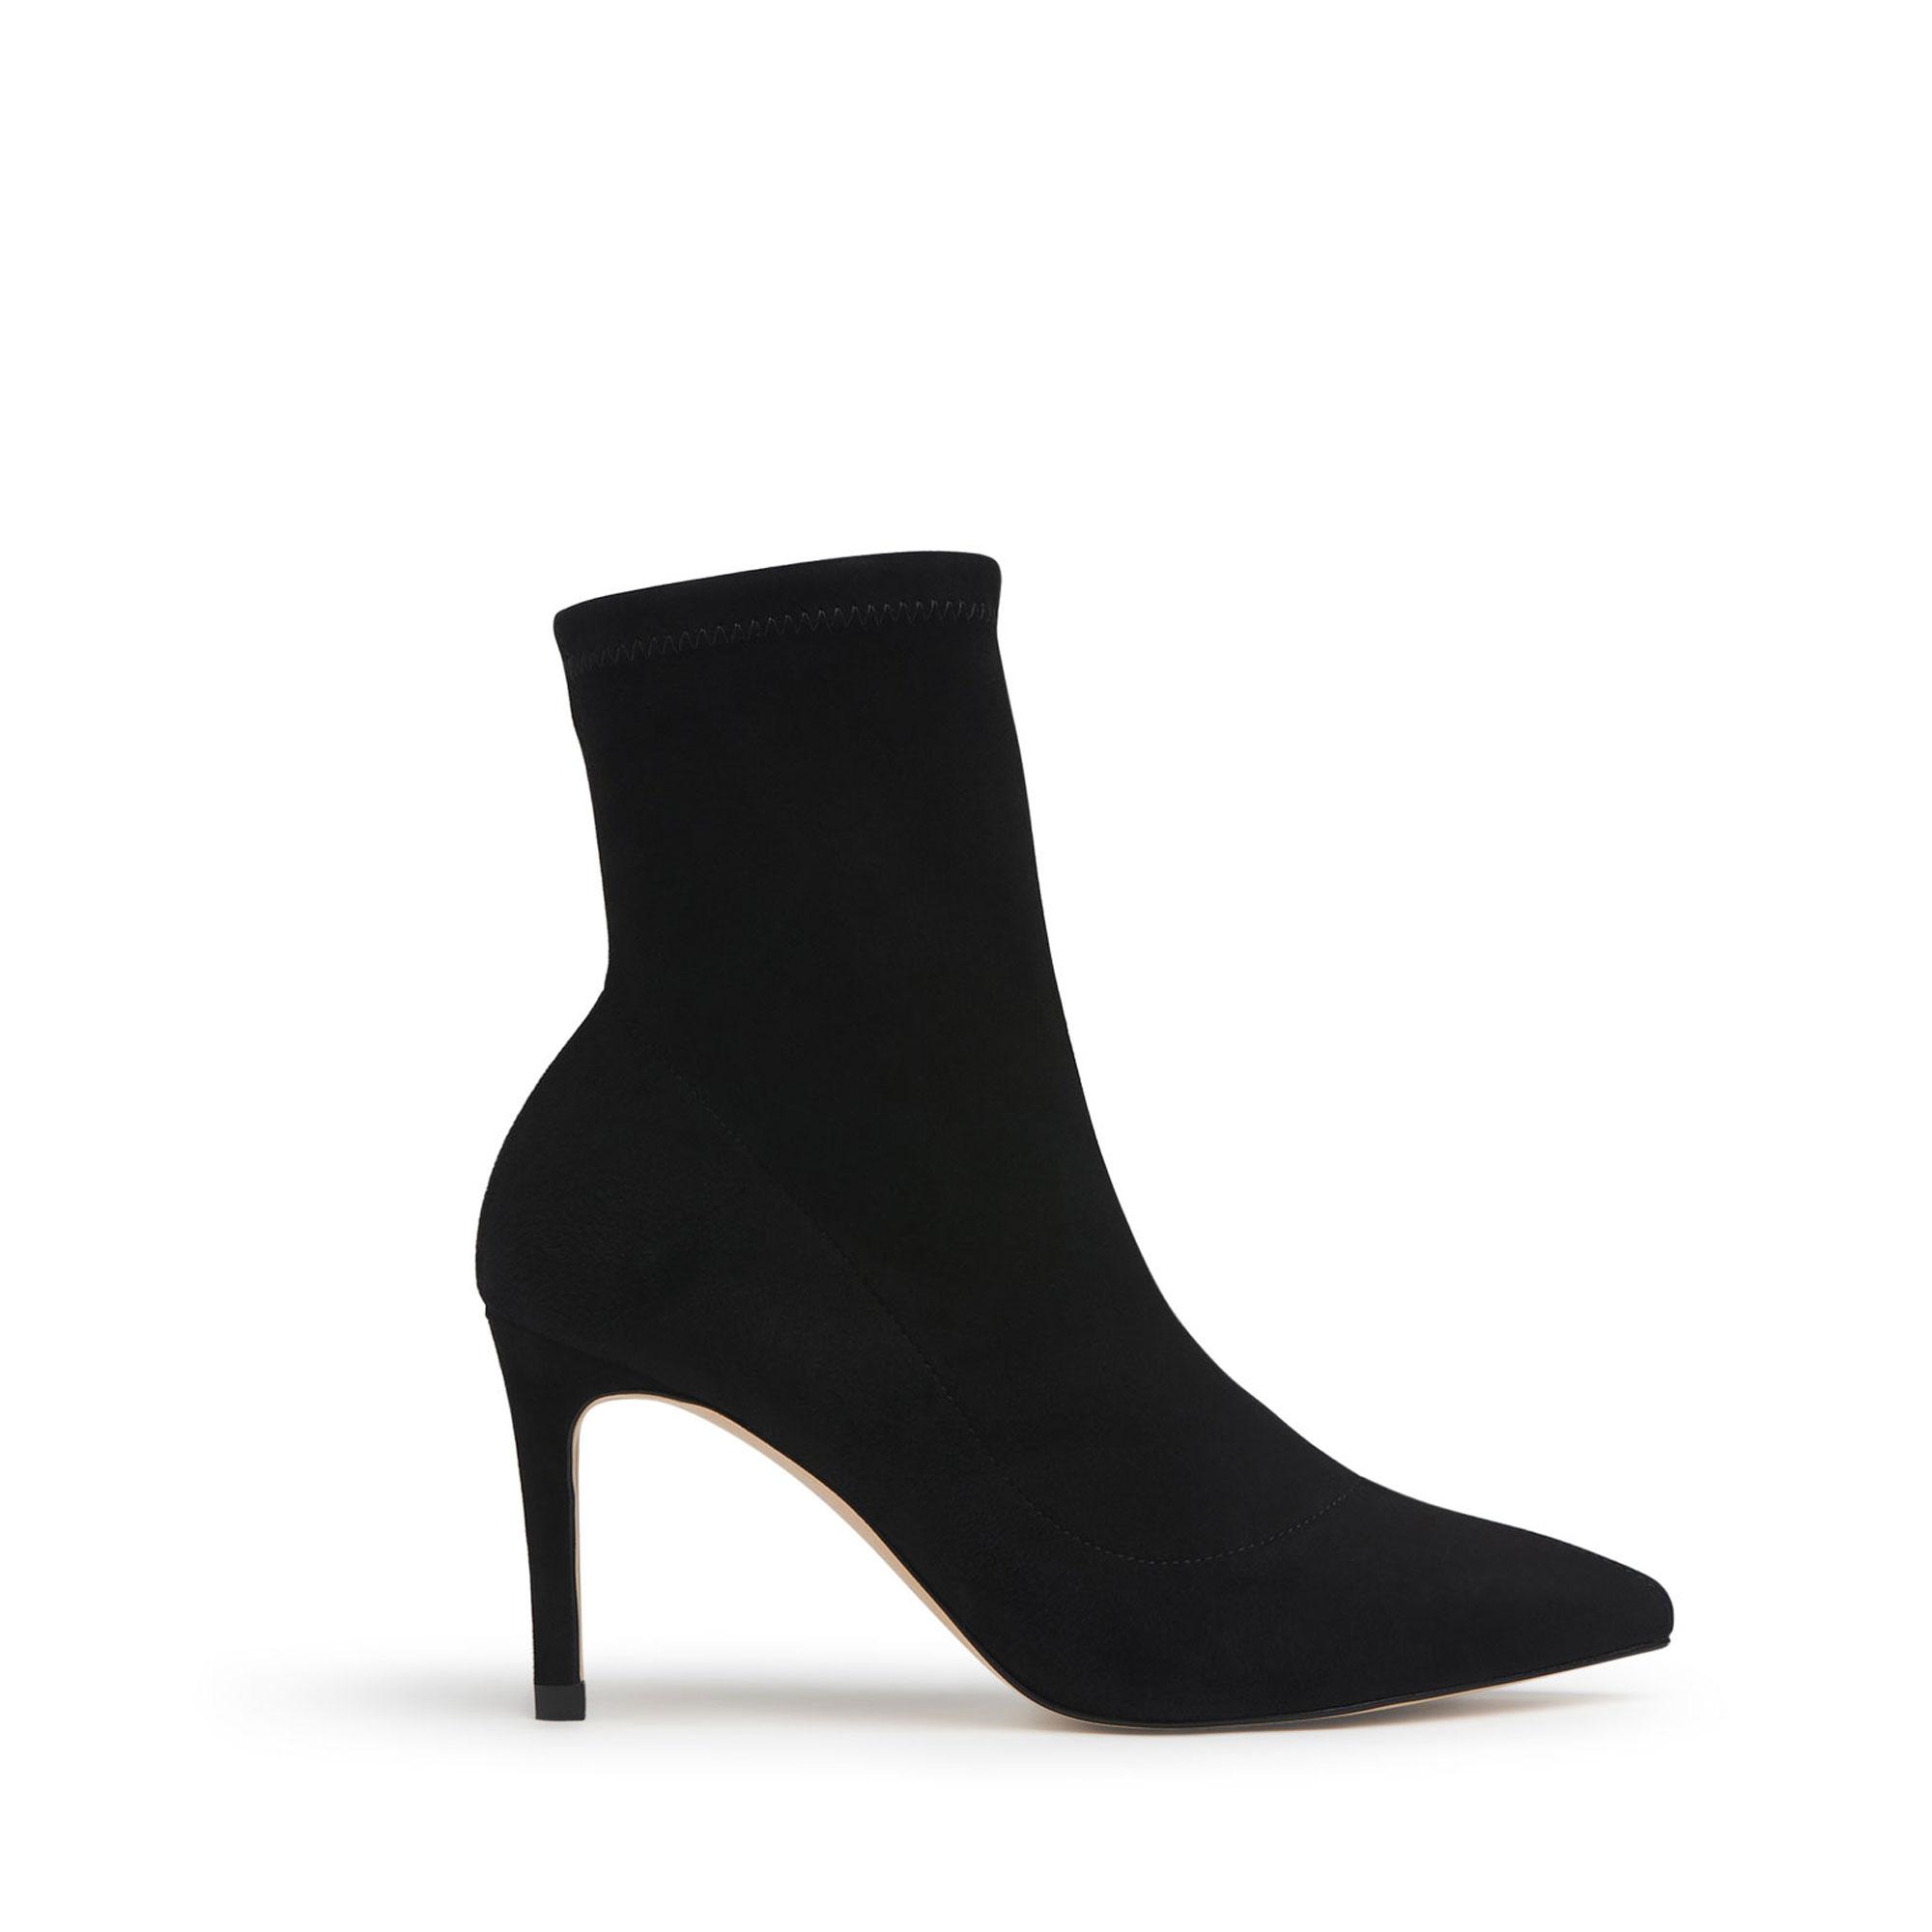 Allie Suede Ankle Boots